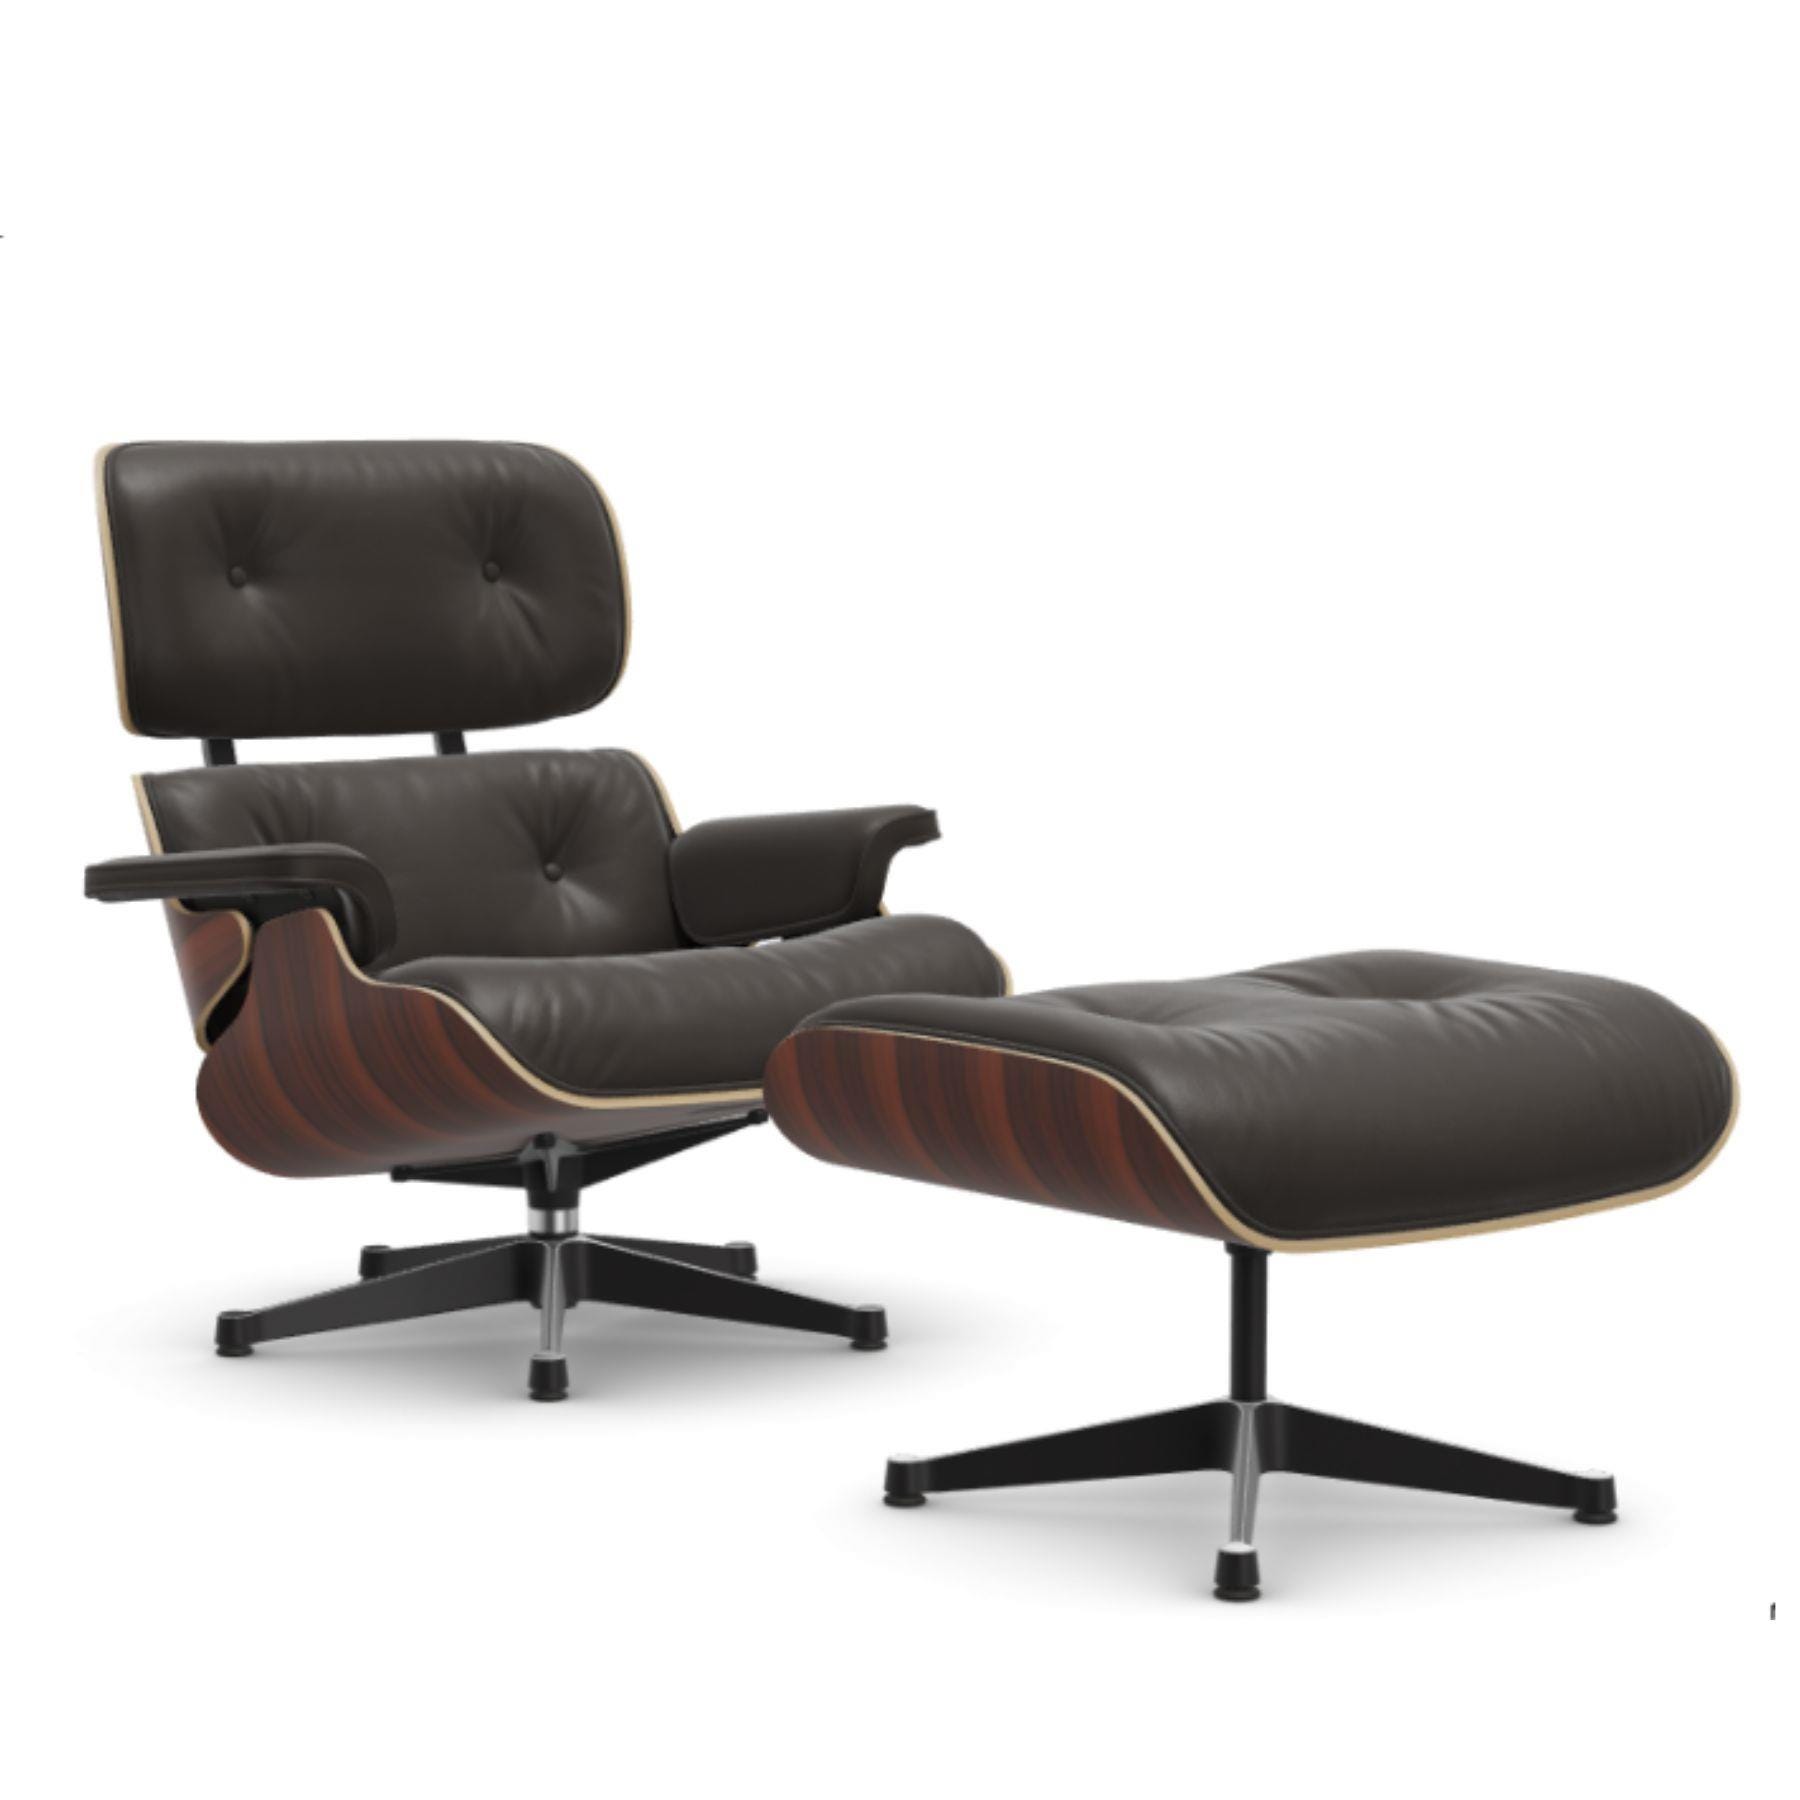 Vitra Eames Classic Lounge Chair Santos Palisander Leather Natural F Chocolate Polished Black With Ottoman Light Wood Designer Furniture From Holl